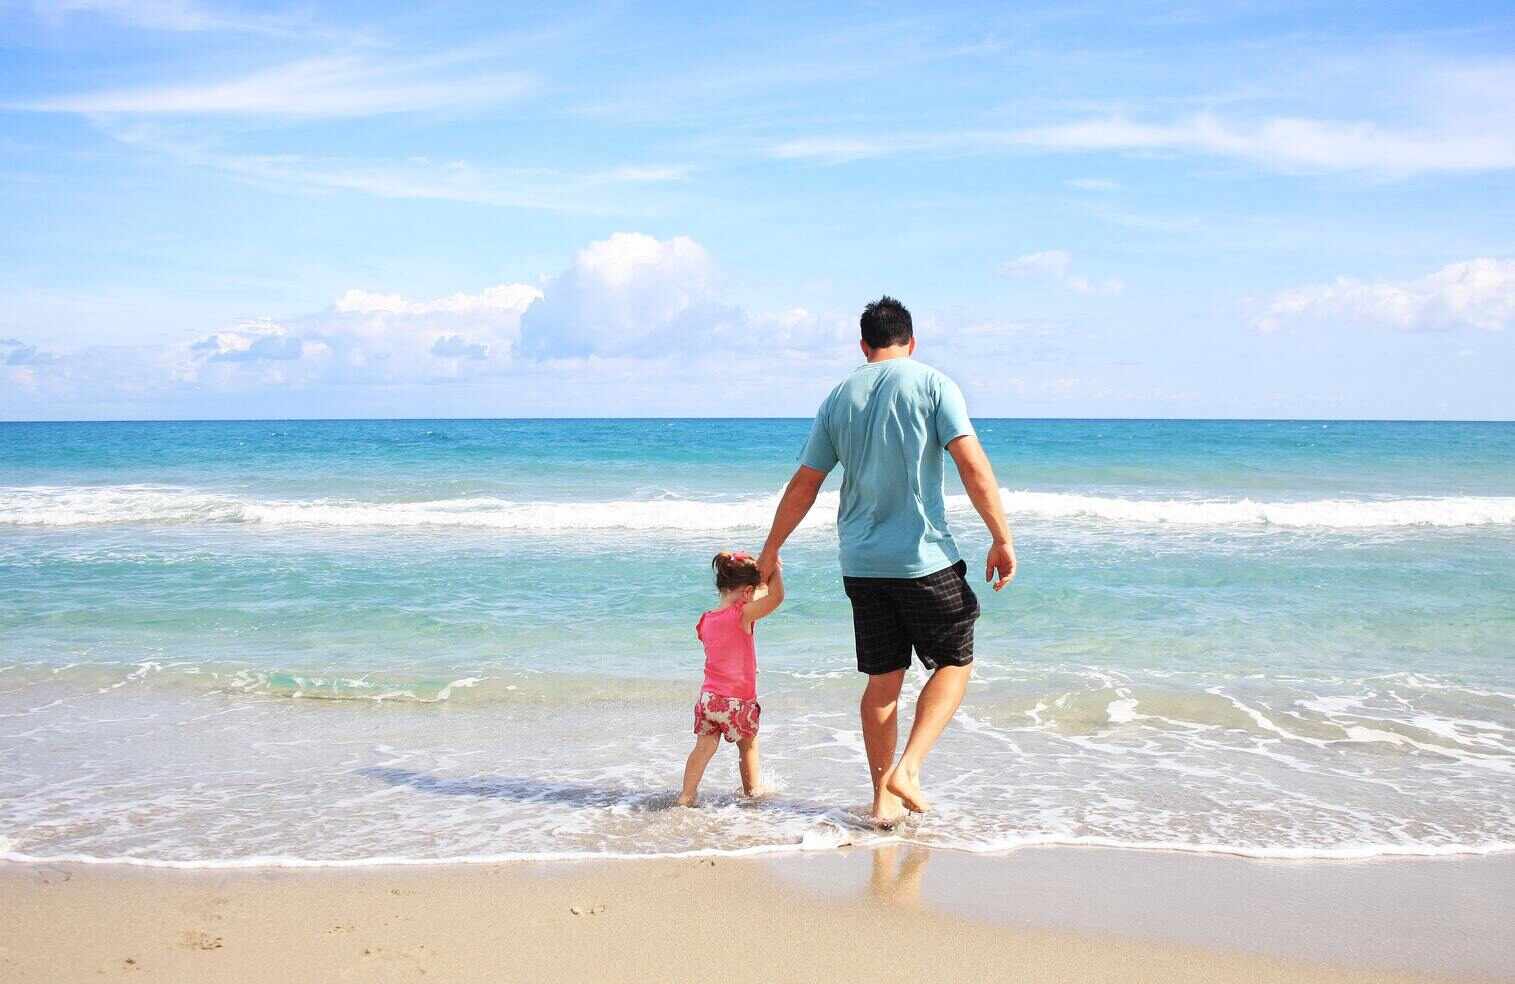 A dad walking hand in hand with his child on a beach.